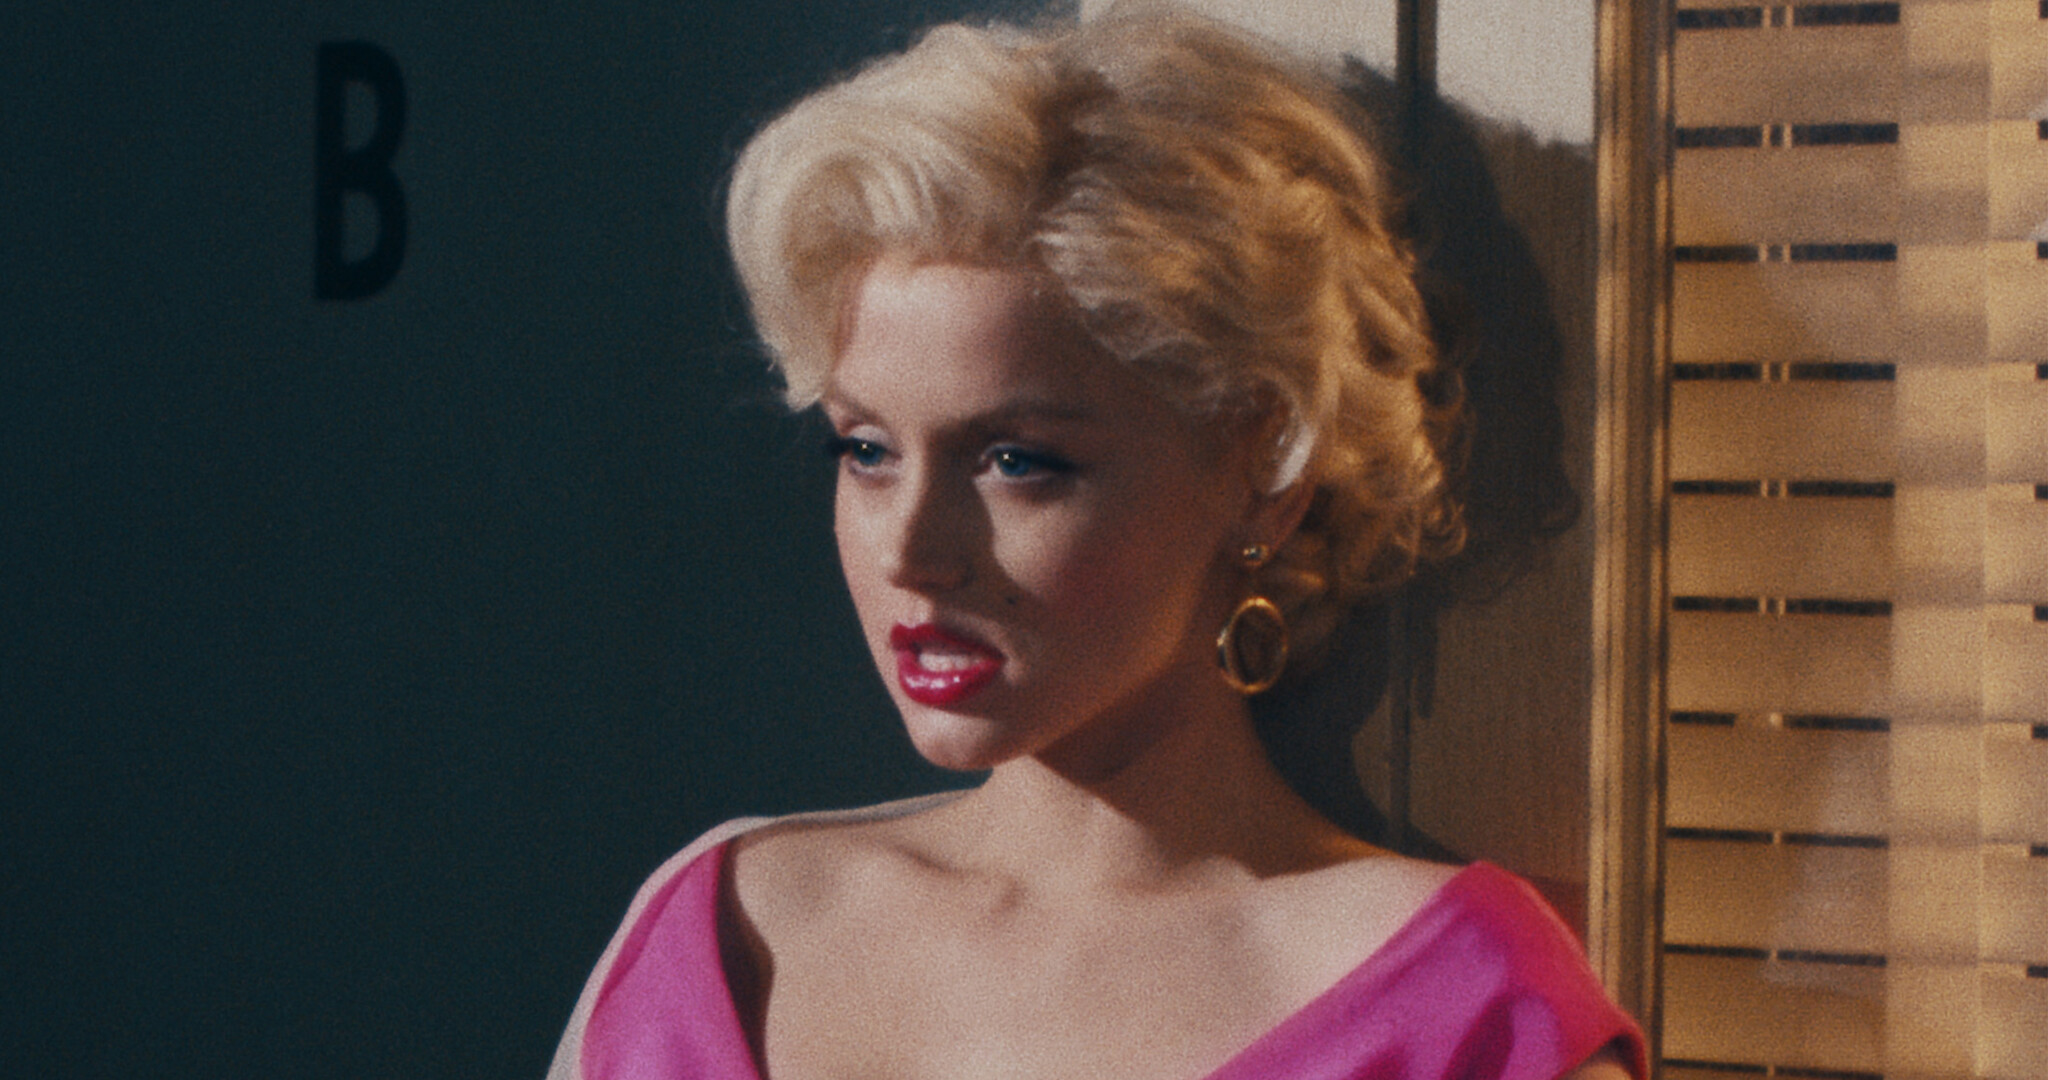 Who Stars In Blonde Marilyn Monroe Movie With Ana de Armas?